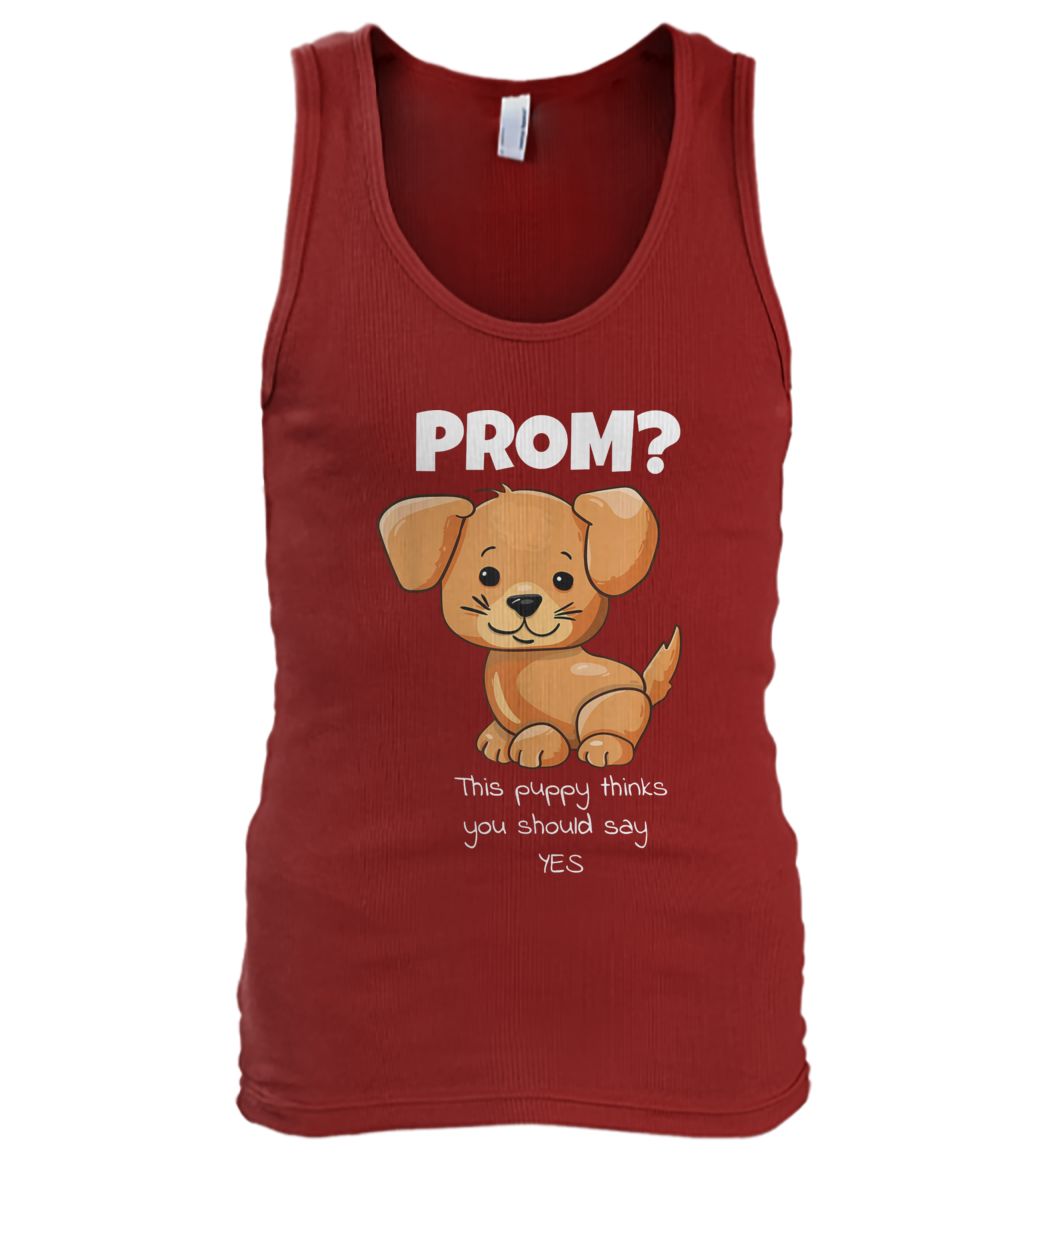 Will you go to prom puppy thinks you should say yes men's tank top